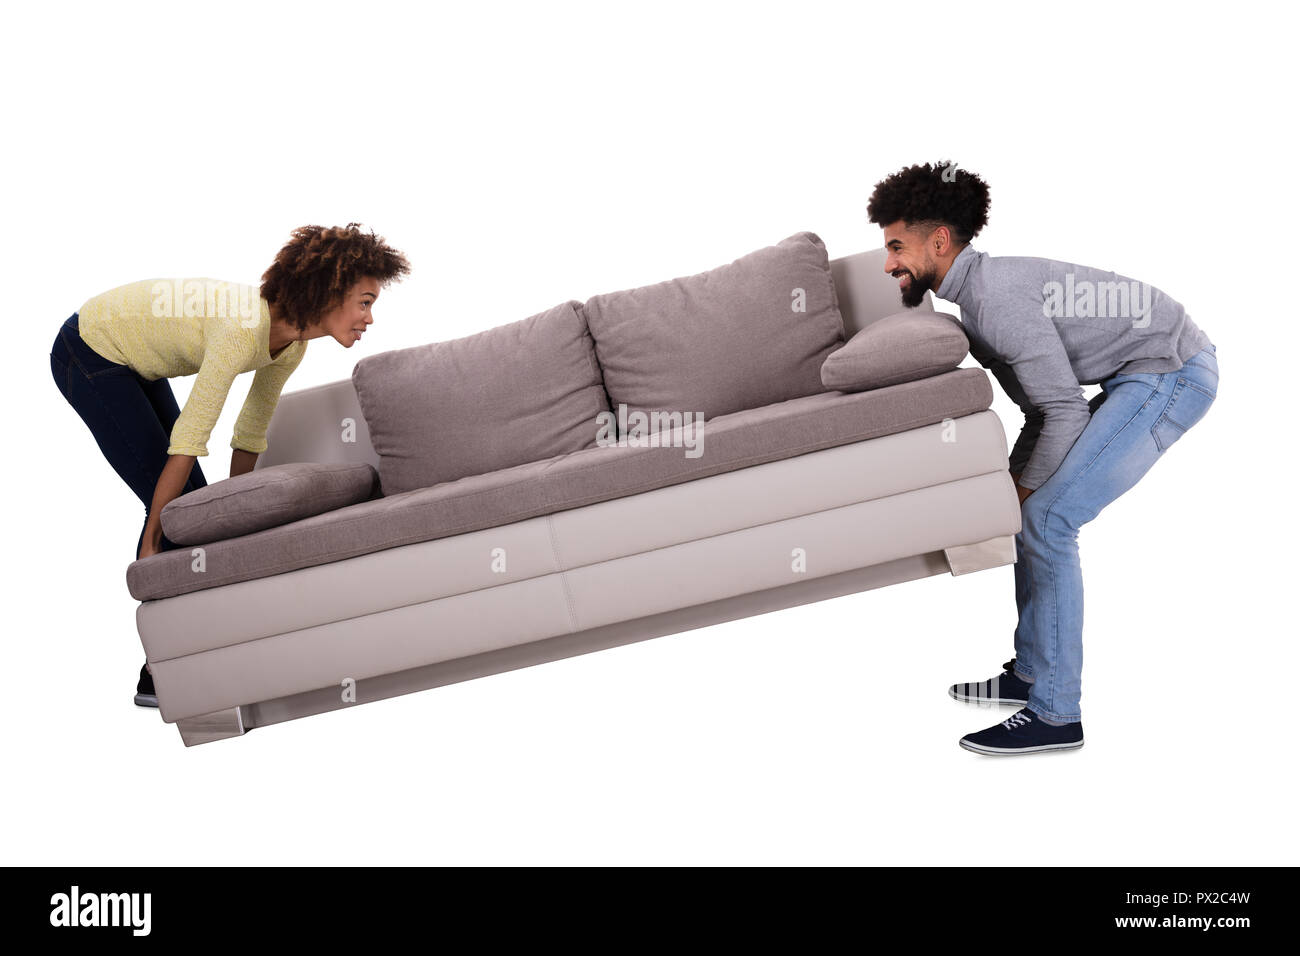 Side View Of An African Couple Carrying Sofa On White Background Stock Photo